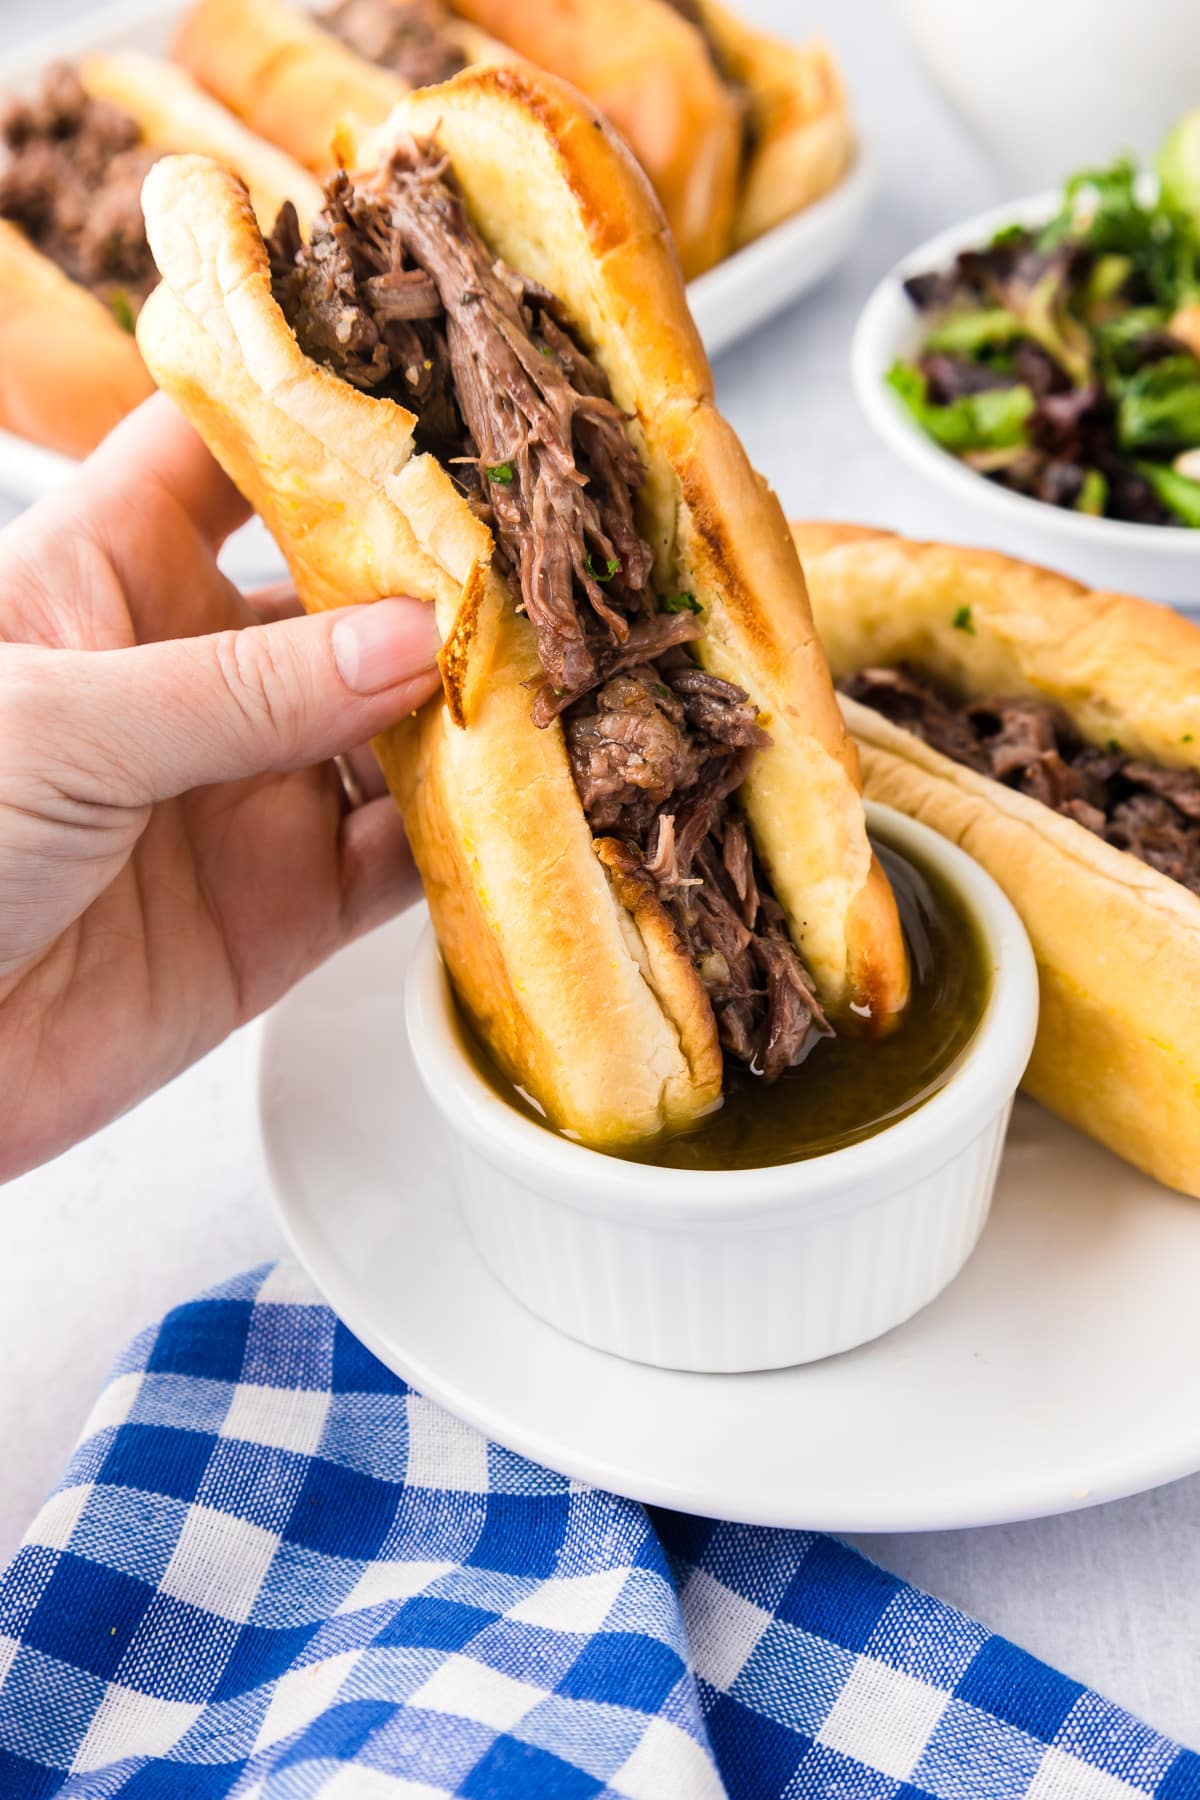 A person's hand holding a french dip sandwich and dipping it into aus jus sauce on a plate.